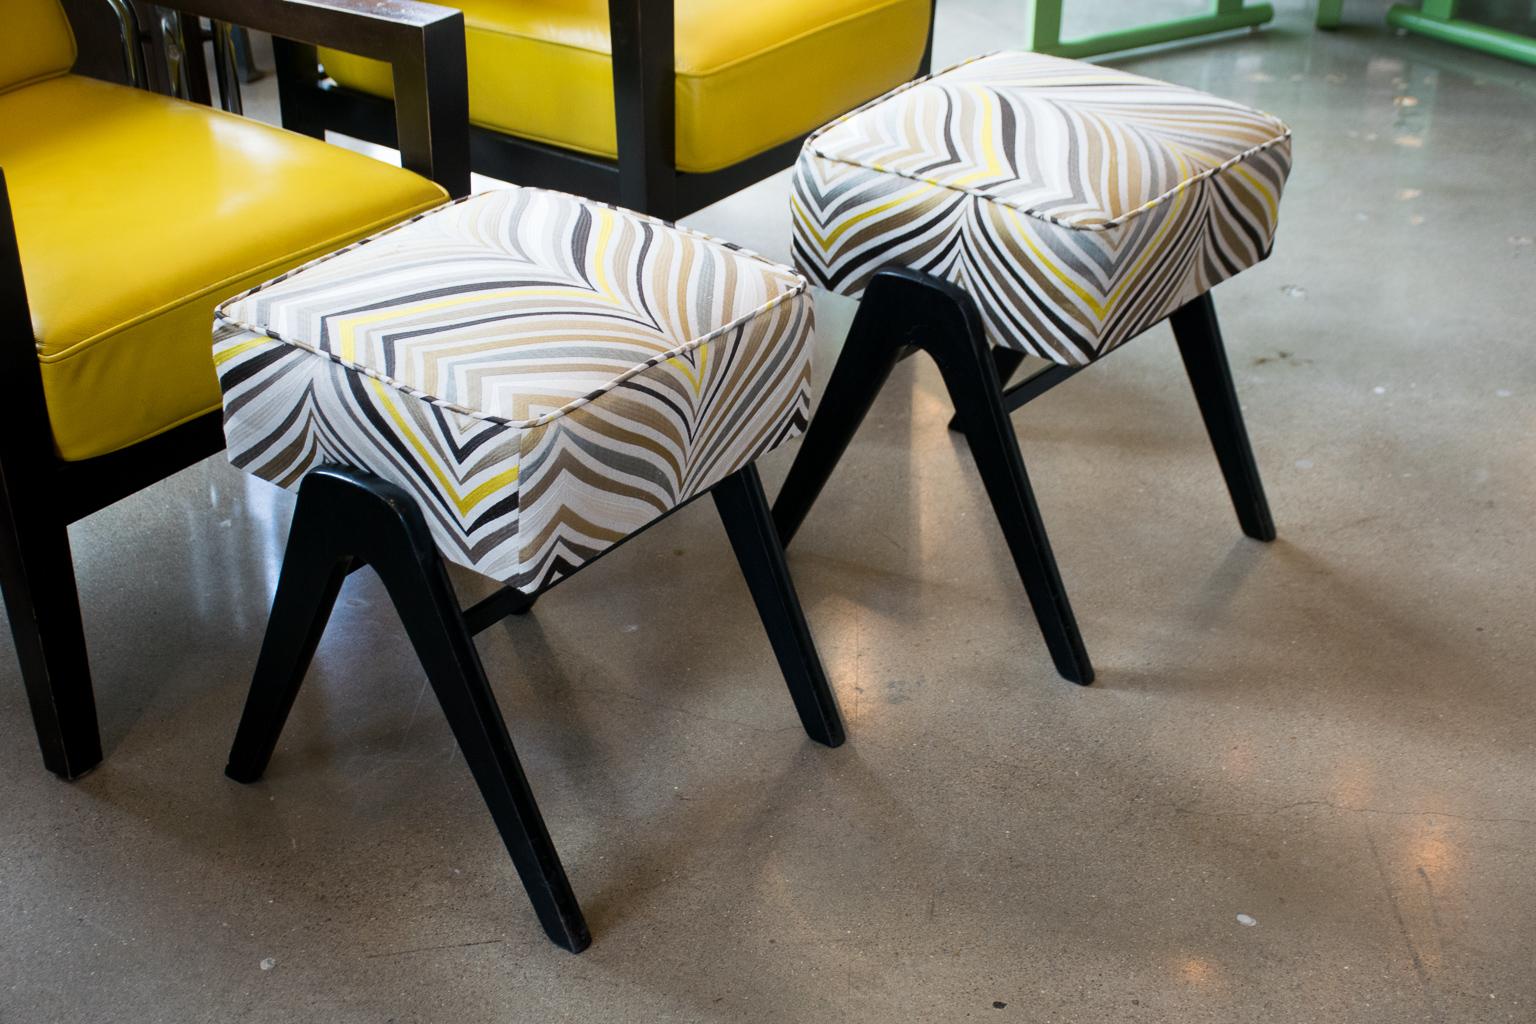 Italian Mid-Century Modern stools with Classic V-legs in ebony finish and new custom upholstery. Upholstered in high end embroidered fabric from groundworks with shades of gray, bronze, black and yellow on natural ground.

See coordinating yellow